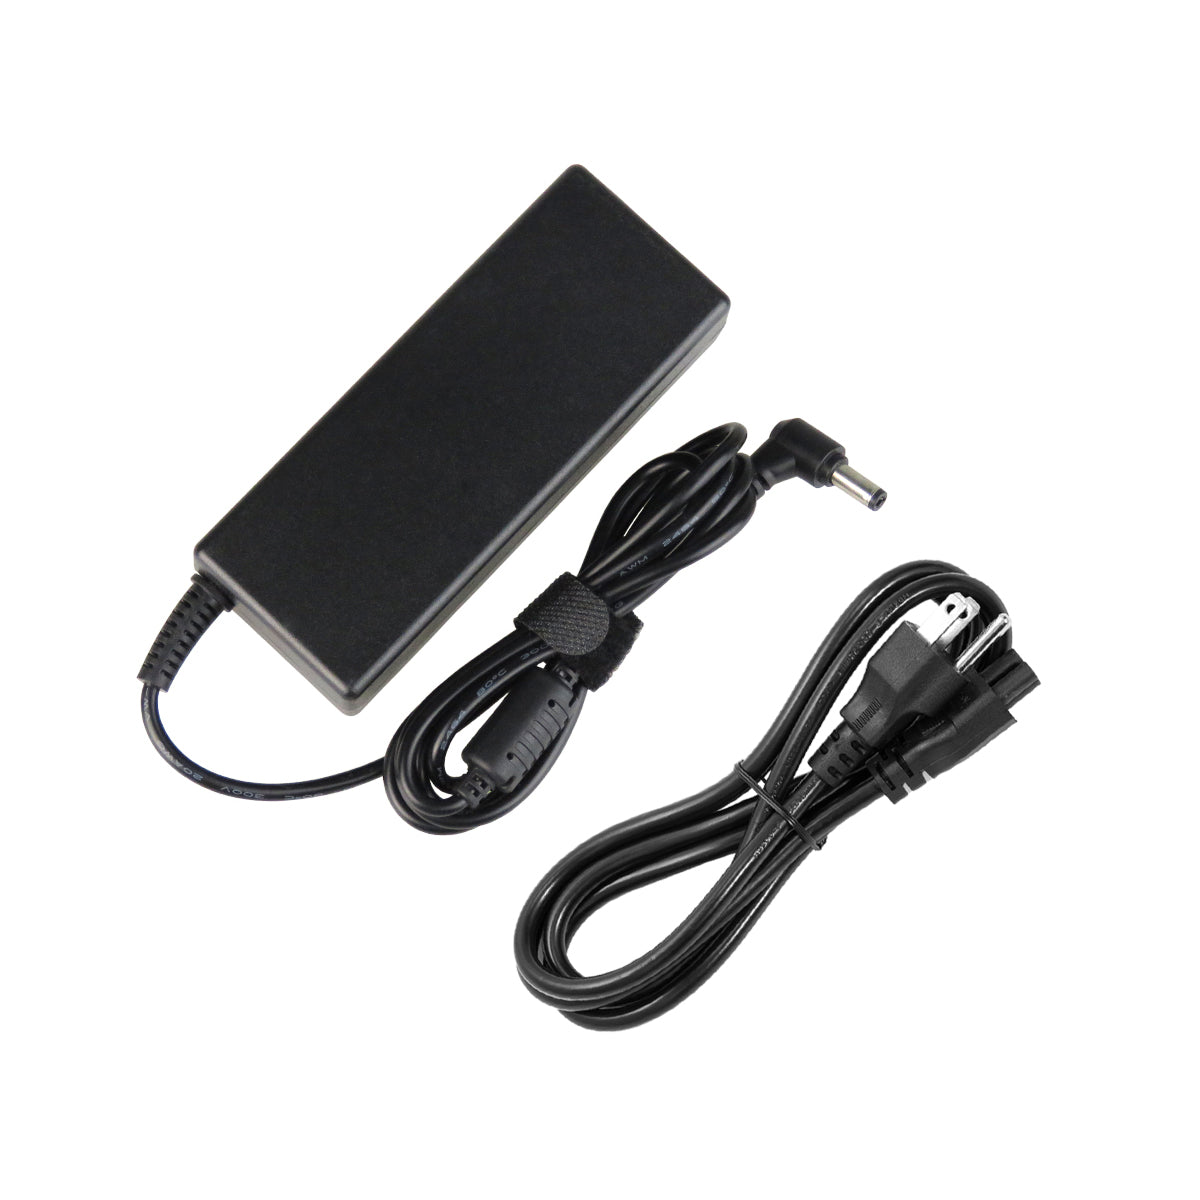 AC Adapter Charger for ASUS X64VG Notebook.